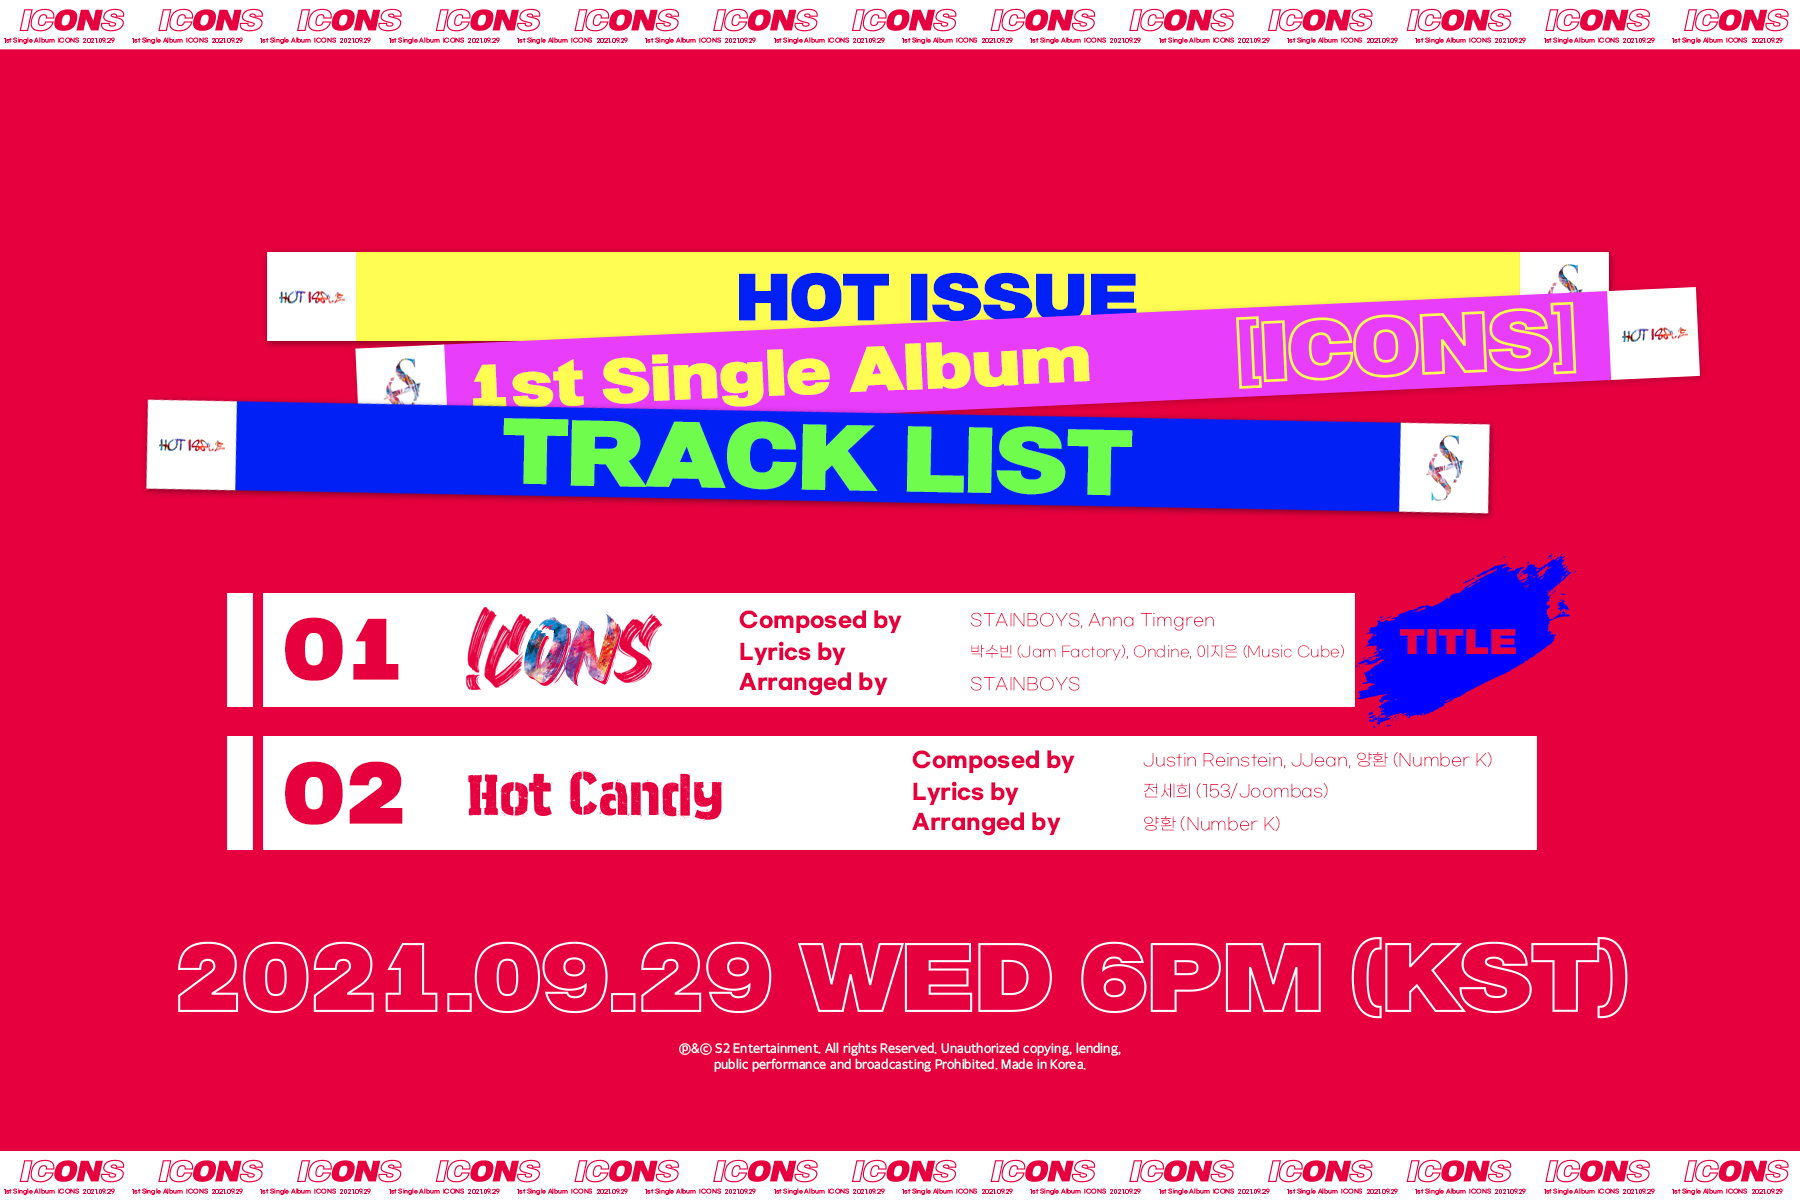 HOT ISSUE - tracklist for upcoming single-album 'ICONS'